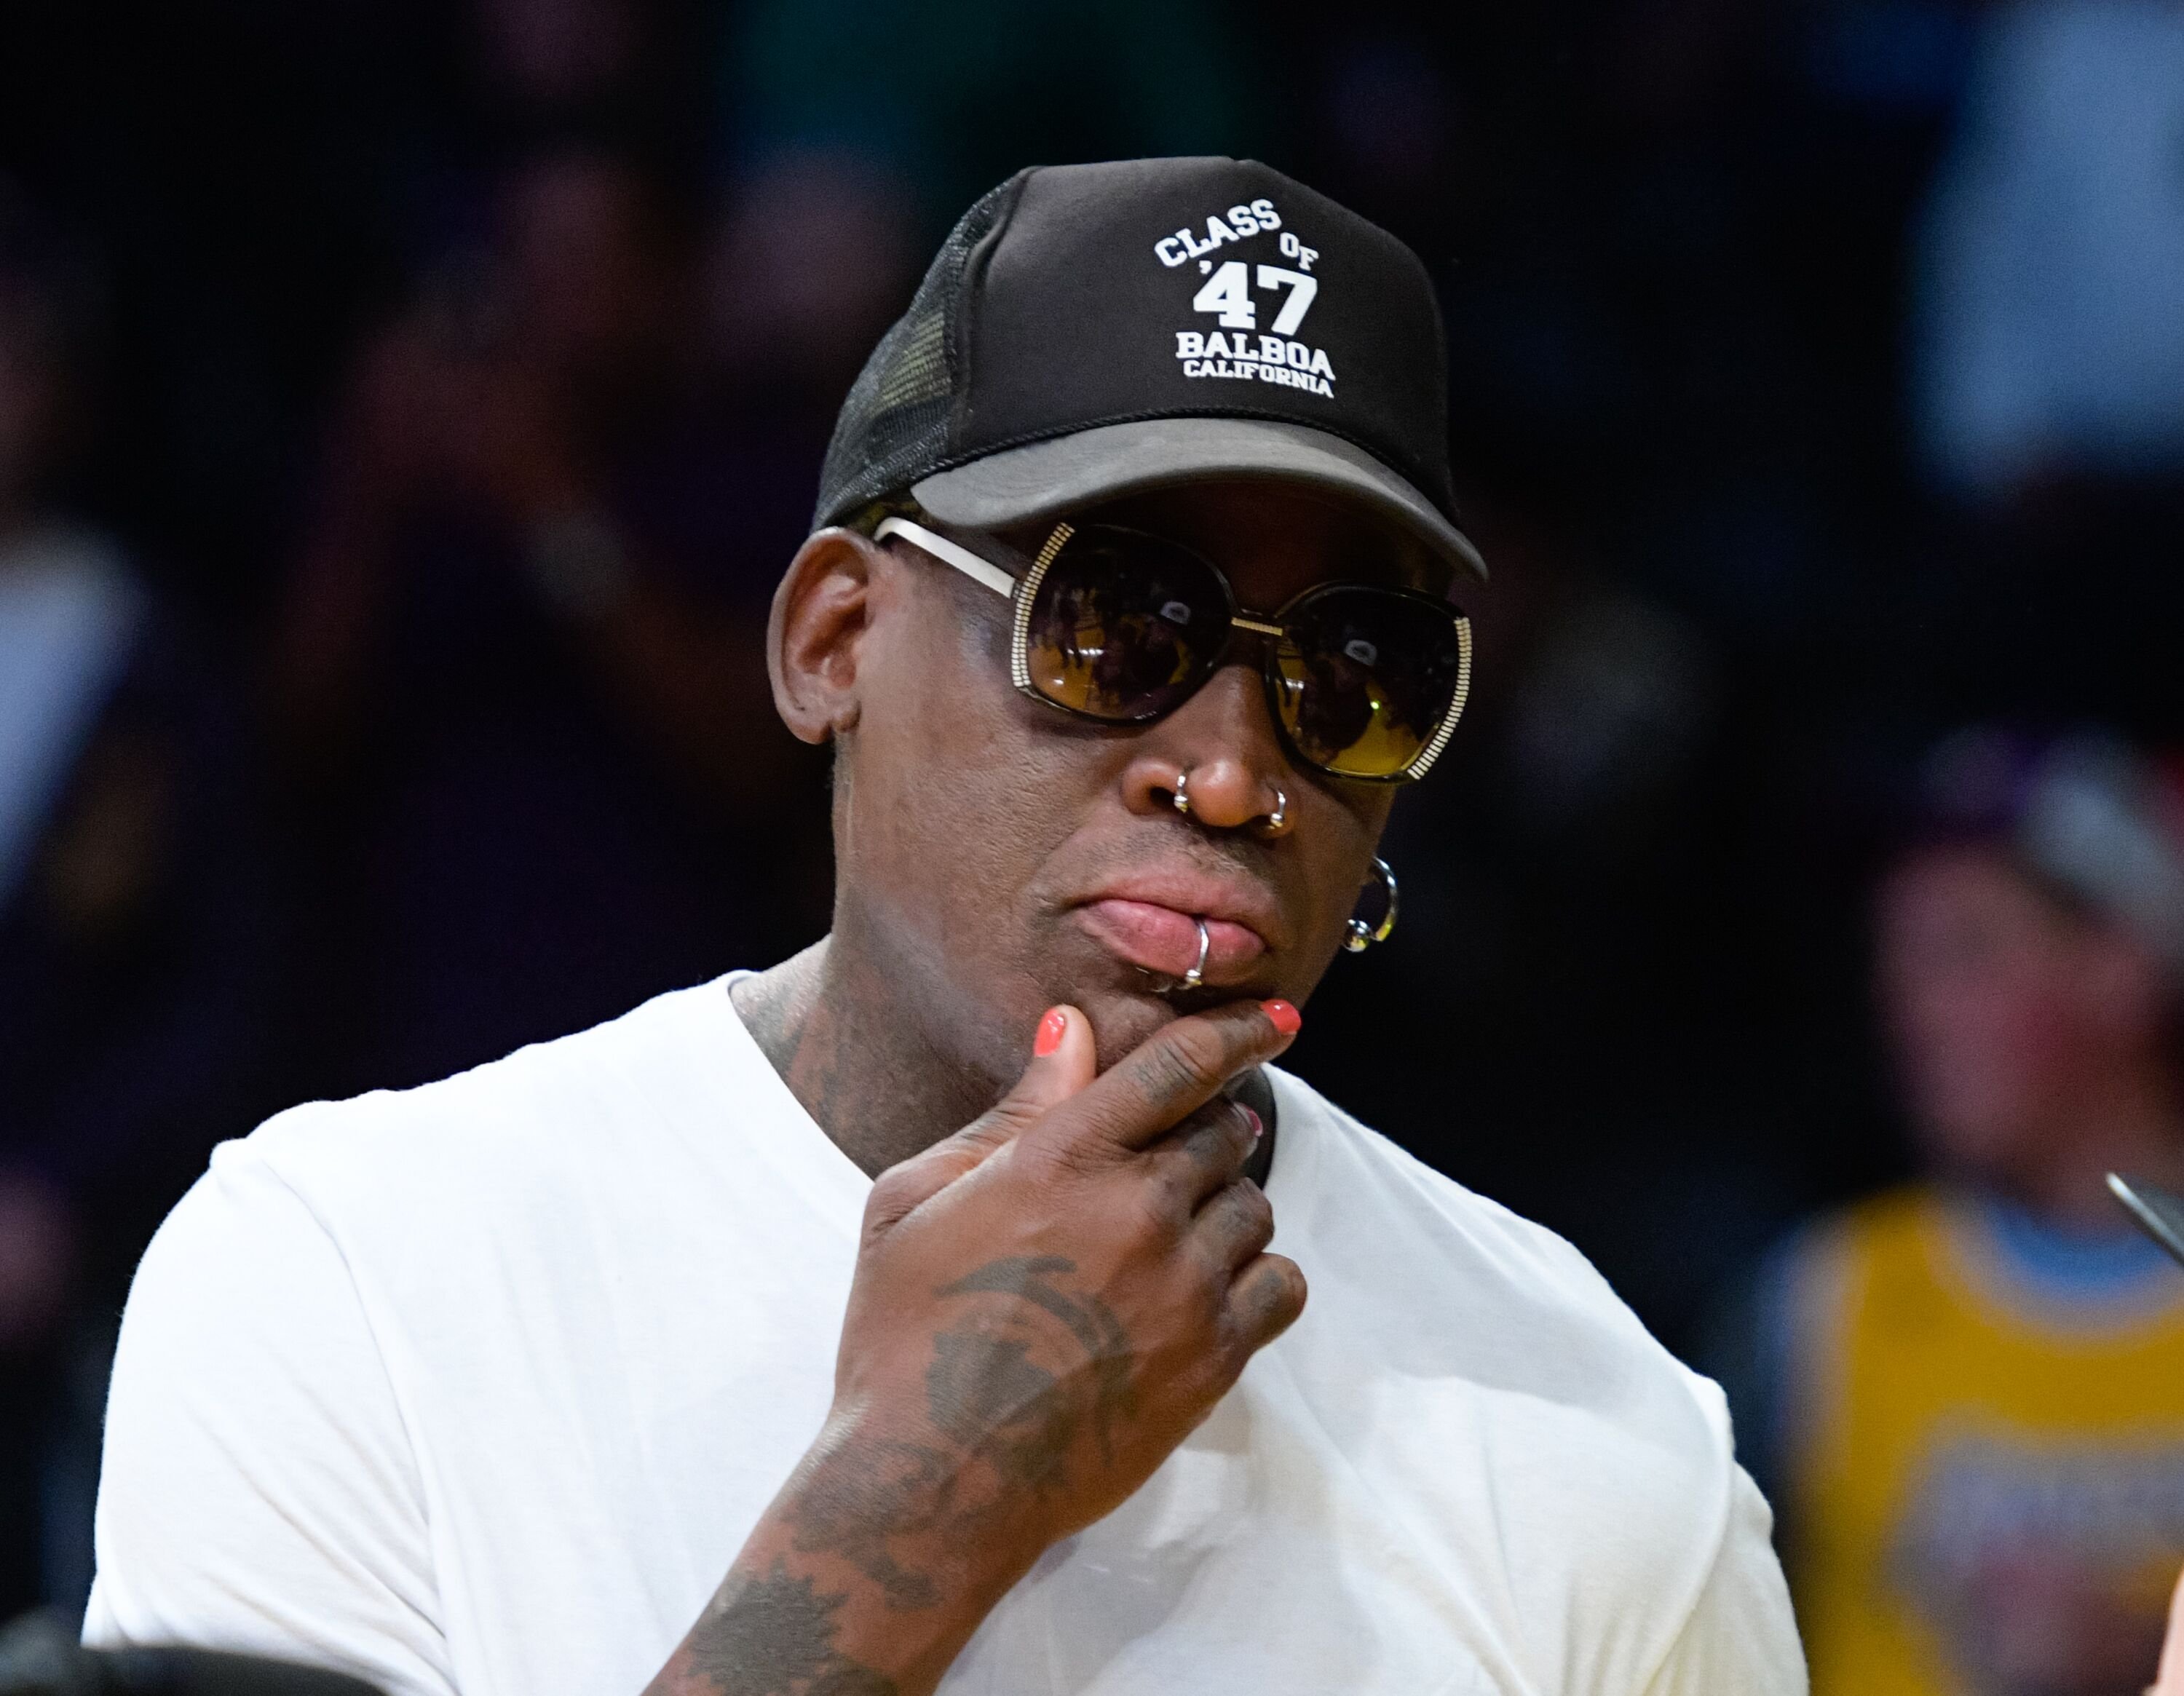 Dennis Rodman at a basketball game between the Golden State Warriors and the Los Angeles Lakers in November 2016 in Los Angeles. | Photo: Getty Images